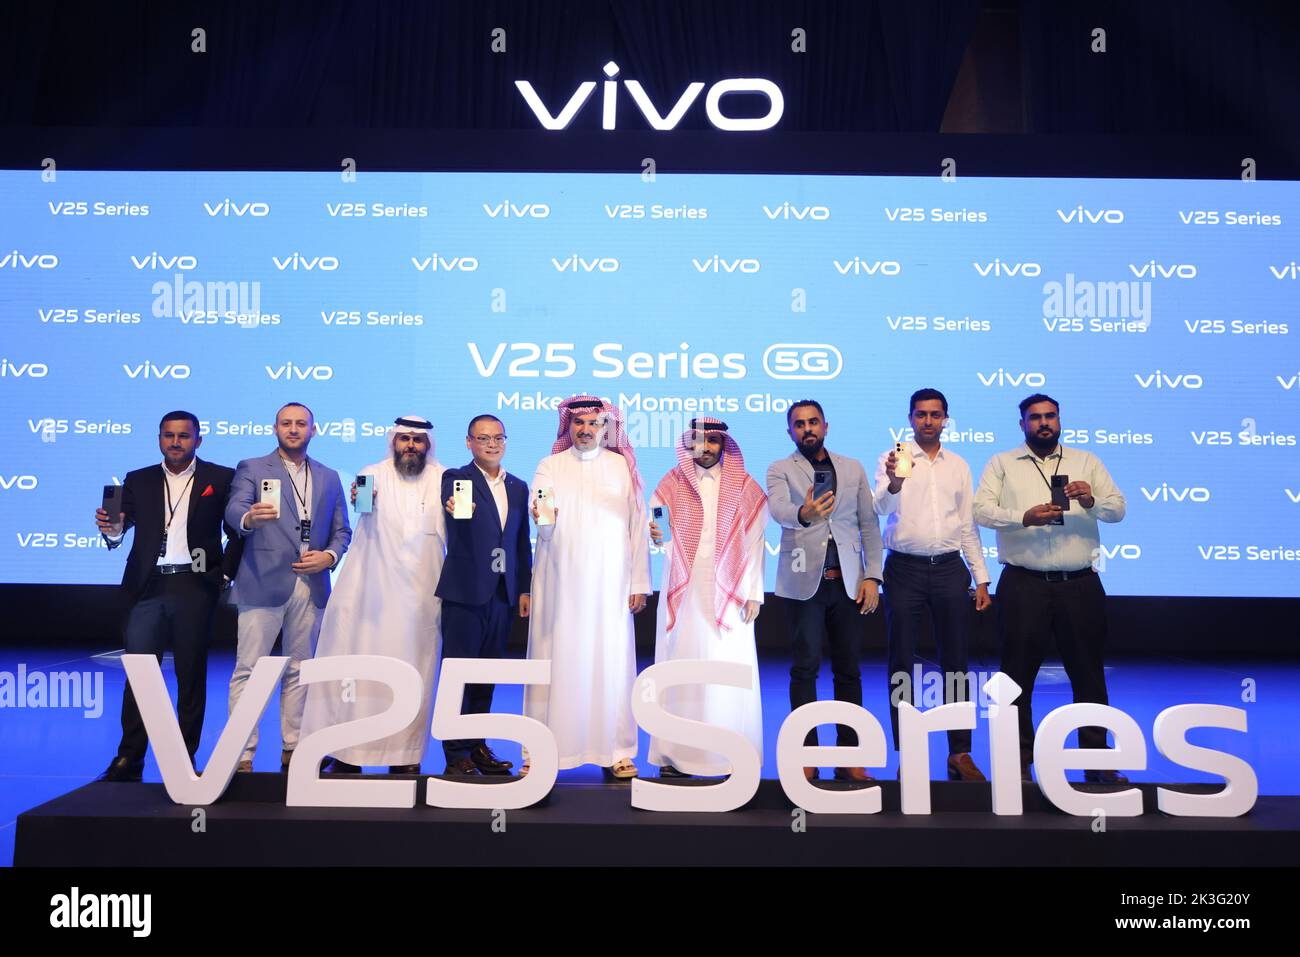 Riyadh, Saudi Arabia. 26th Sep, 2022. Officials and guests show new smartphones during a launch of Vivo's new products in Riyadh, Saudi Arabia, on Sept. 26, 2022. Chinese phone maker Vivo unveiled on Monday two 5G smartphones in Riyadh. At its launch of new products in the kingdom, Vivo presented the latest additions to its 5G smartphones V series: V25 and V25 Pro, which feature superior photography. Credit: Wang Haizhou/Xinhua/Alamy Live News Stock Photo